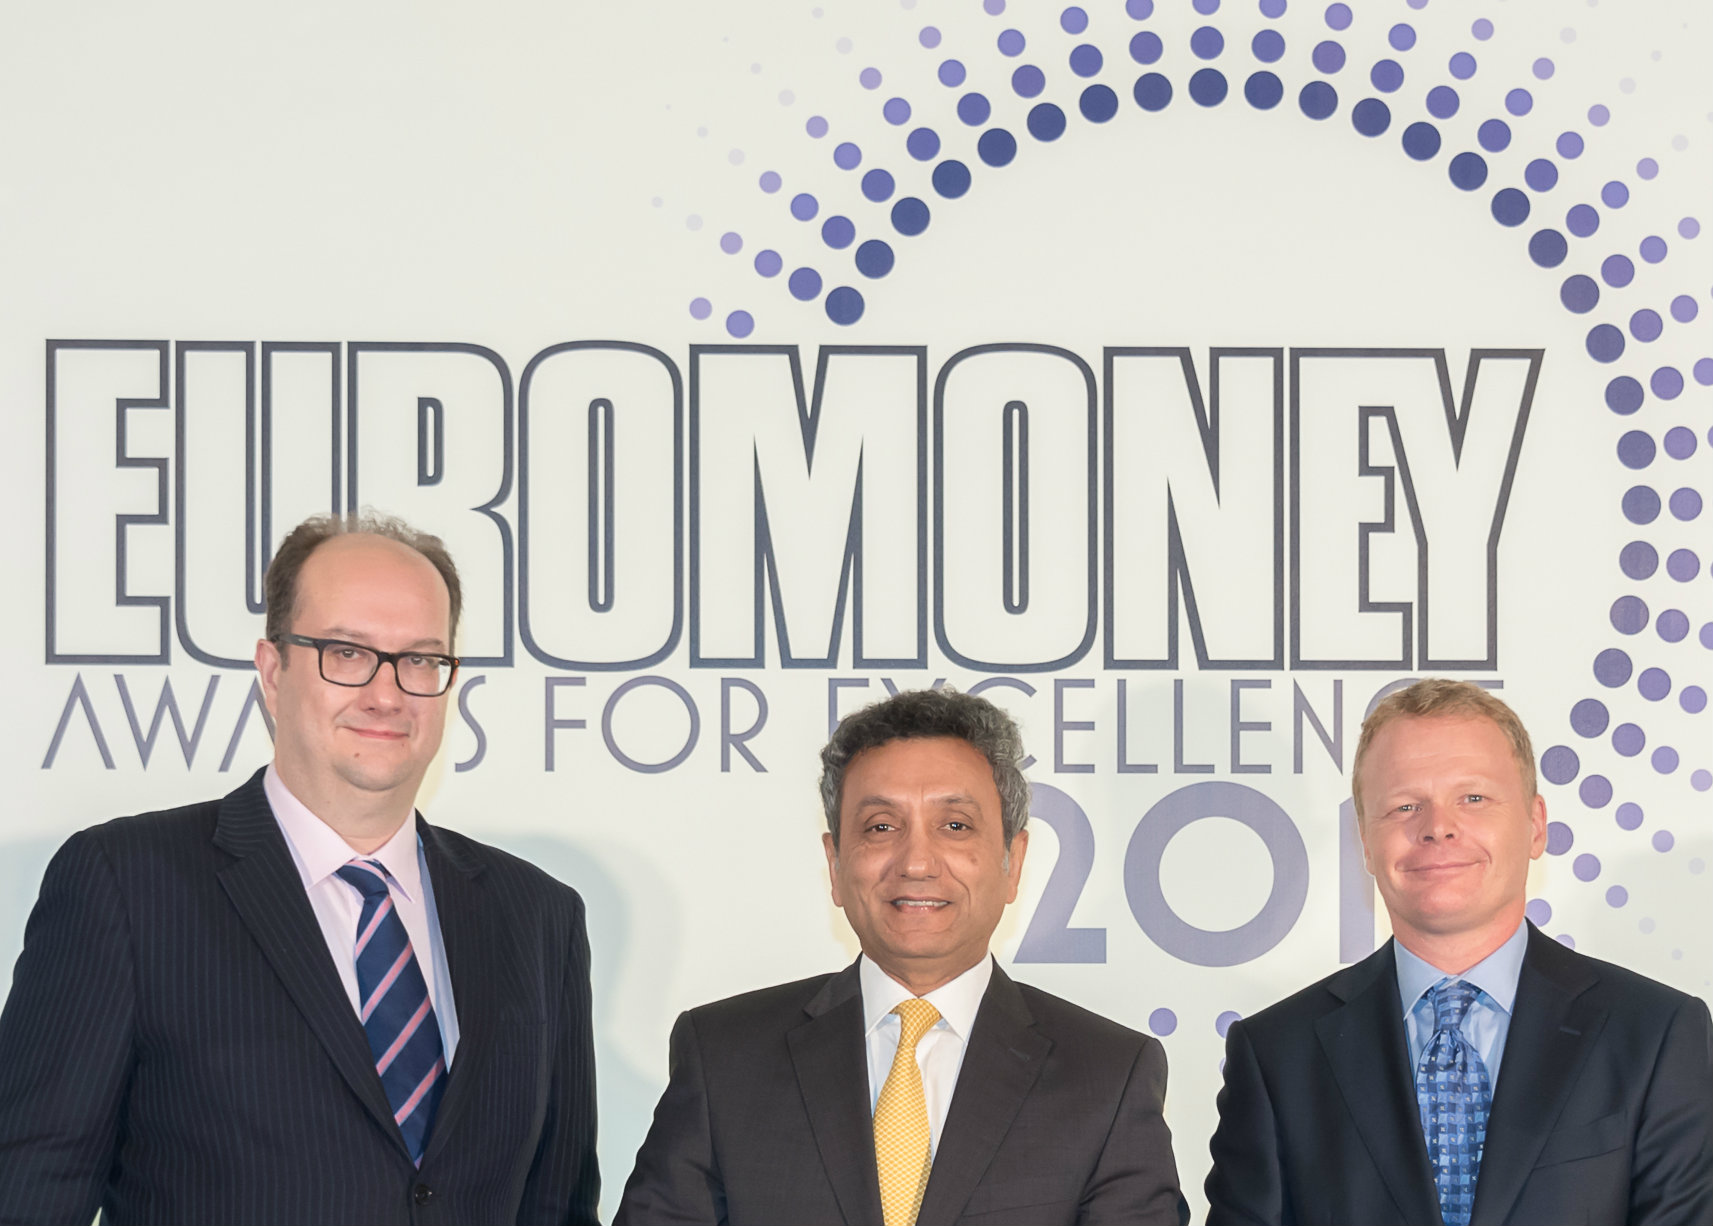 MCB Bank Ltd declared “Pakistan’s Best Bank” at Euromoney Awards for Excellence 2016